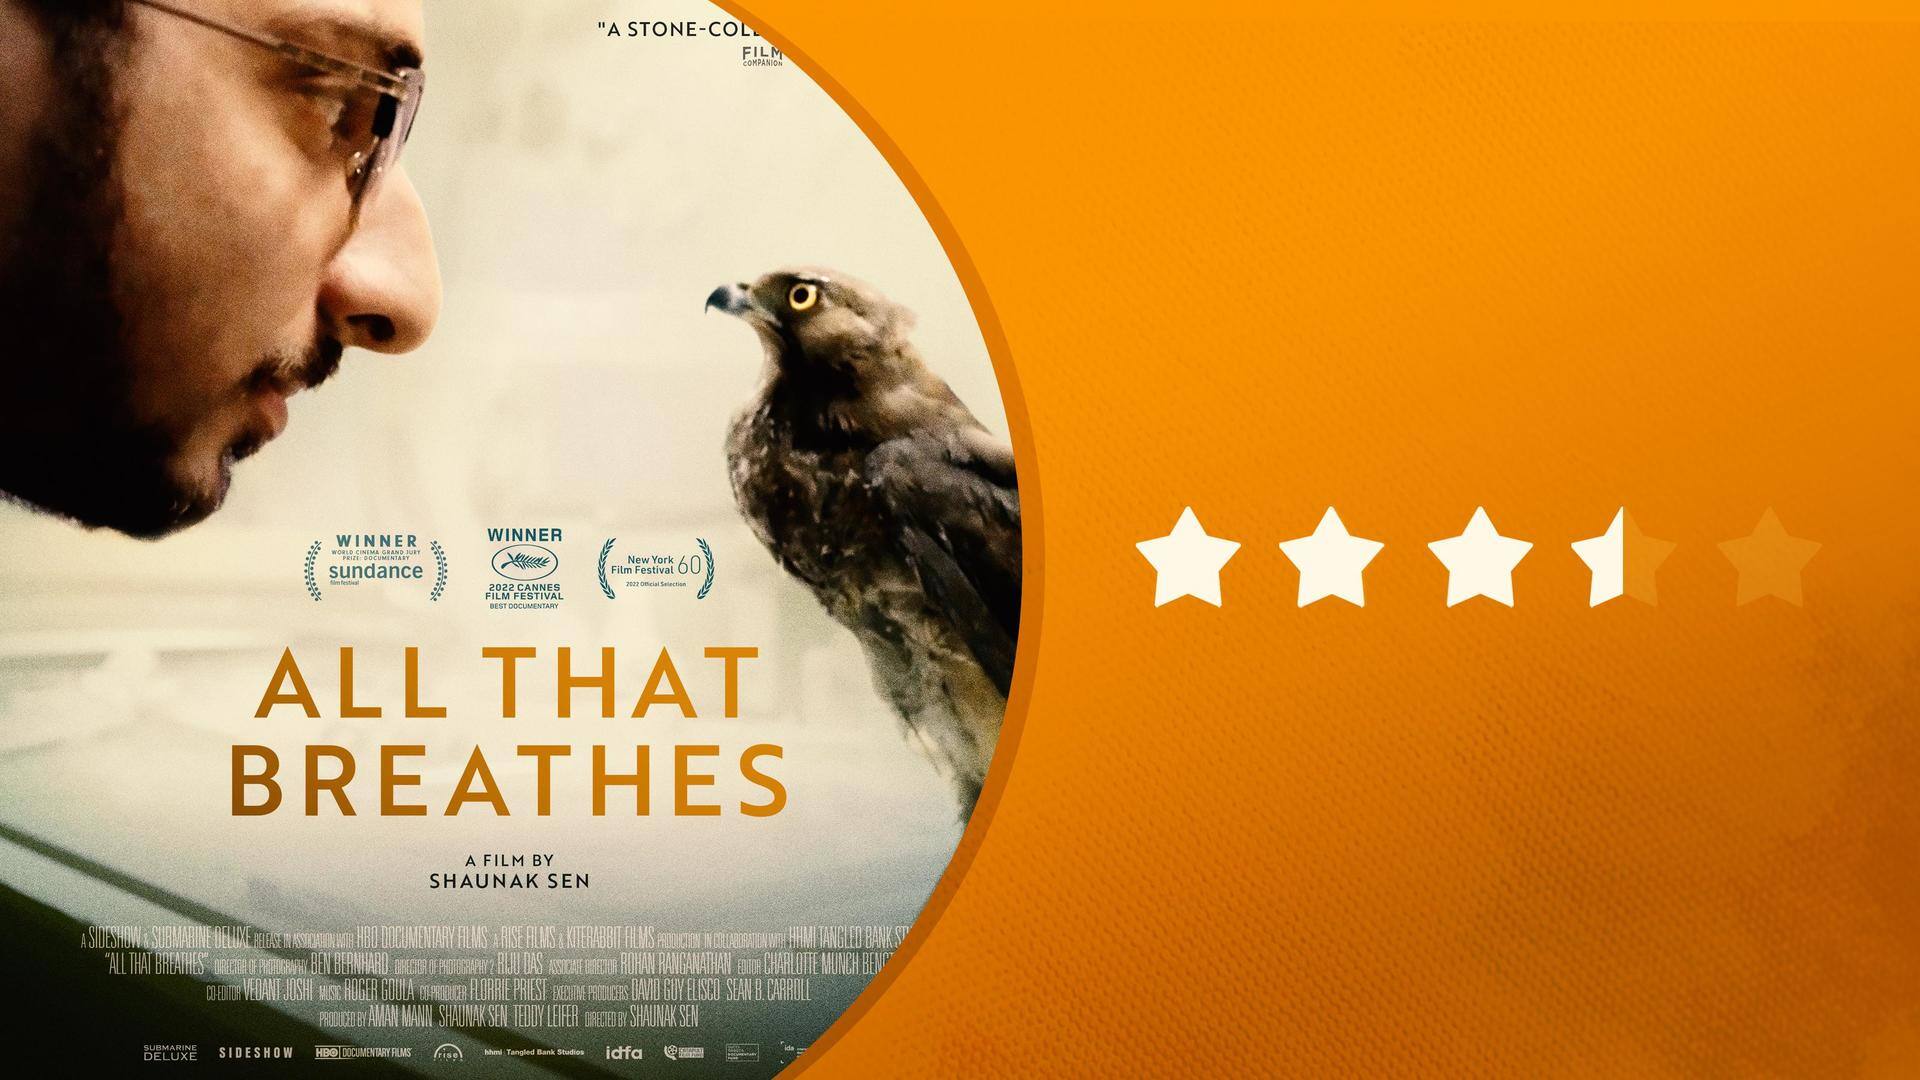 'All That Breathes' review: Poetic tale of perseverance, compassion, humanity